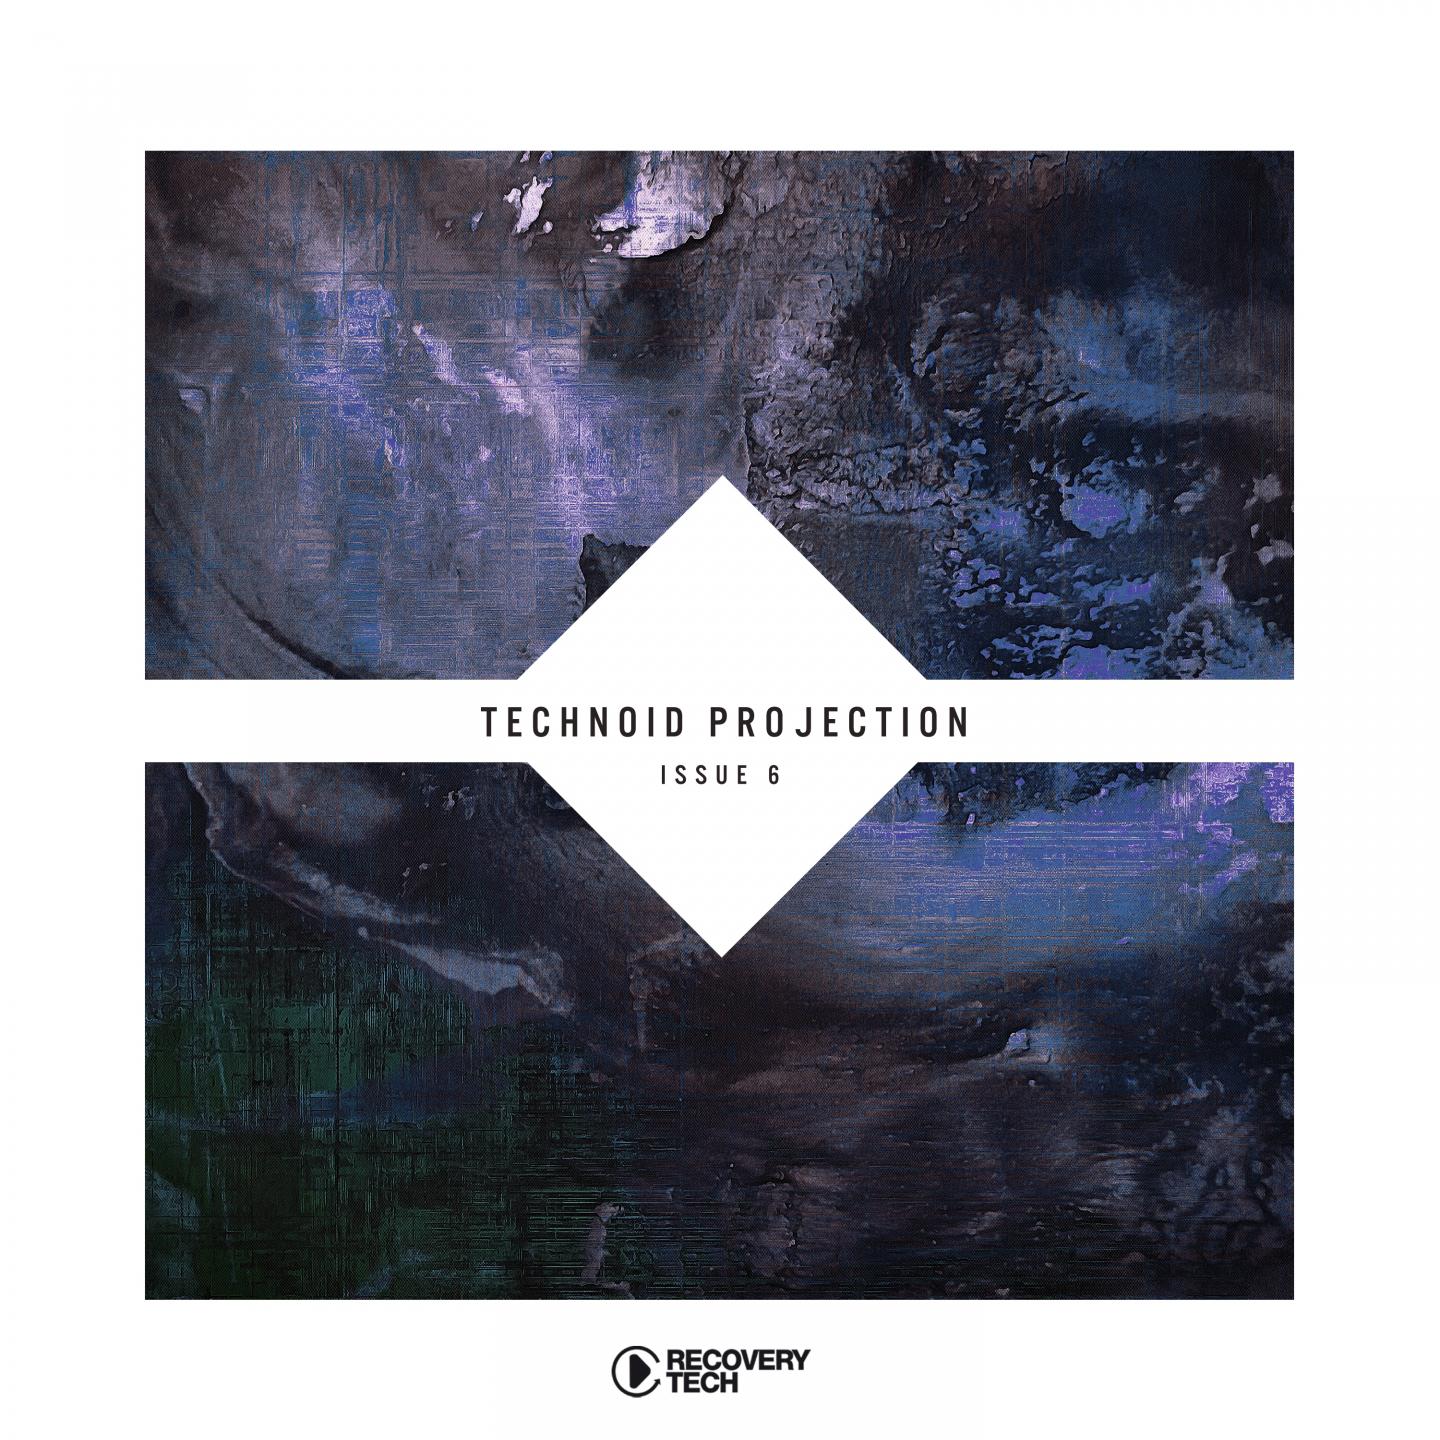 Technoid Projection Issue 6